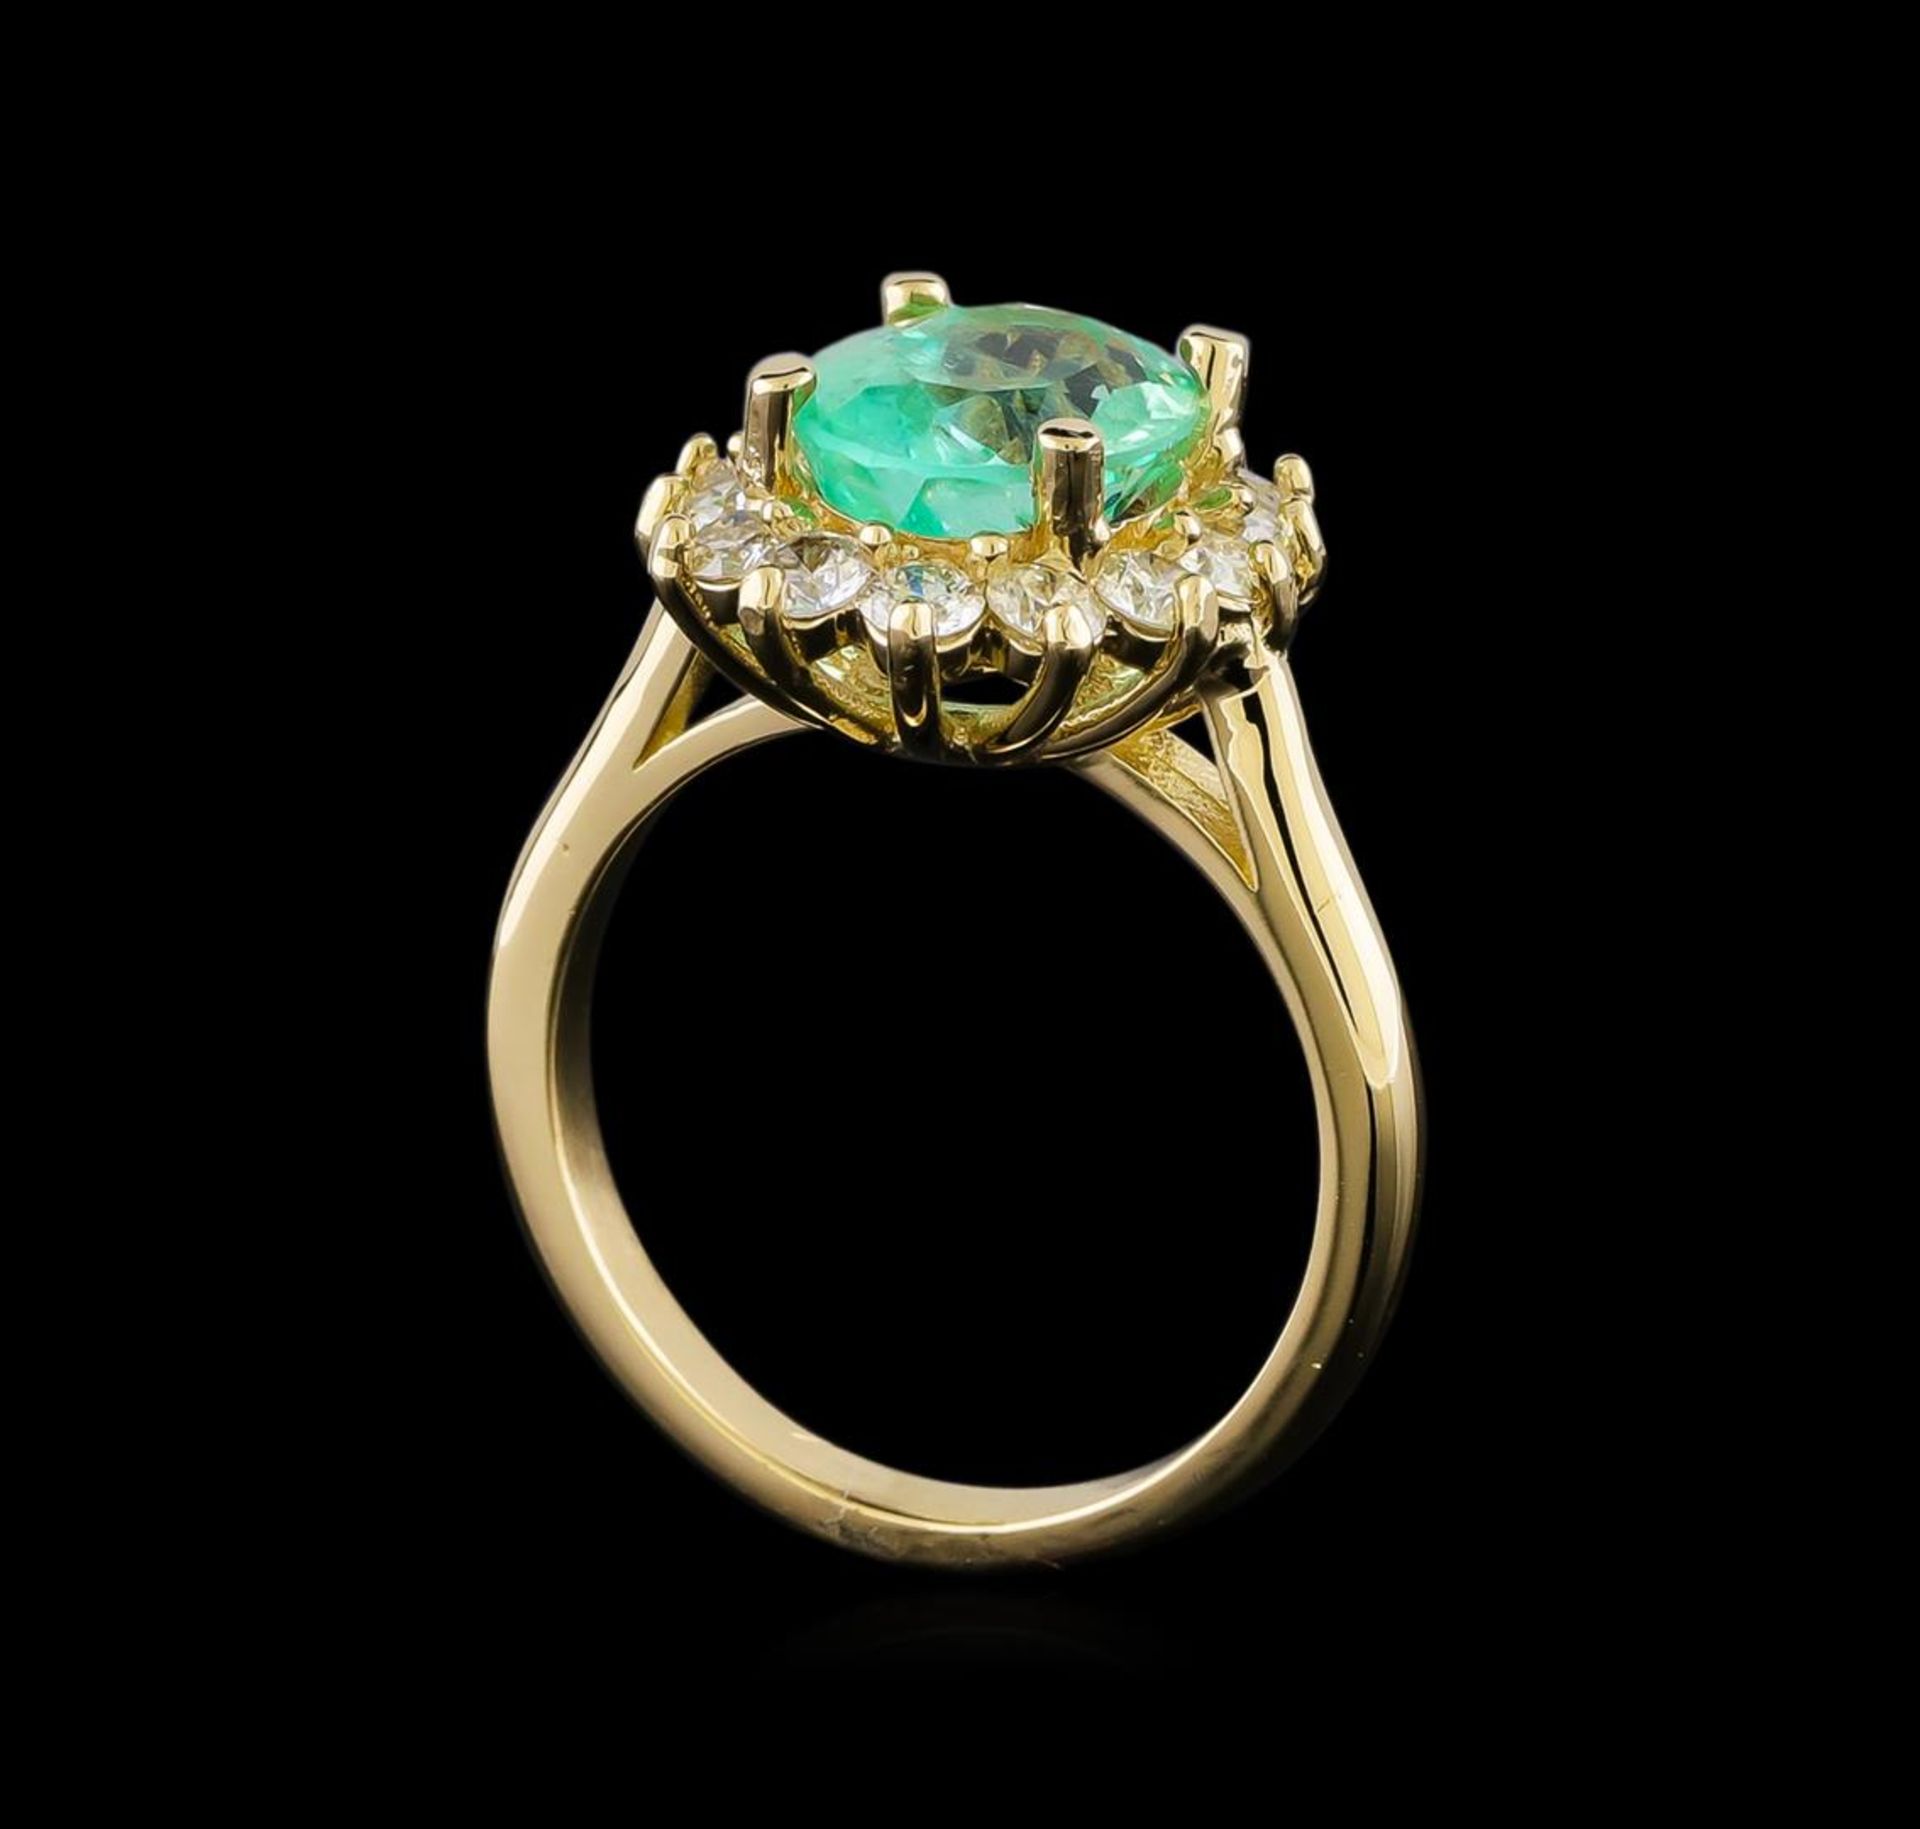 2.65 ctw Emerald and Diamond Ring - 14KT Yellow Gold - Image 4 of 5